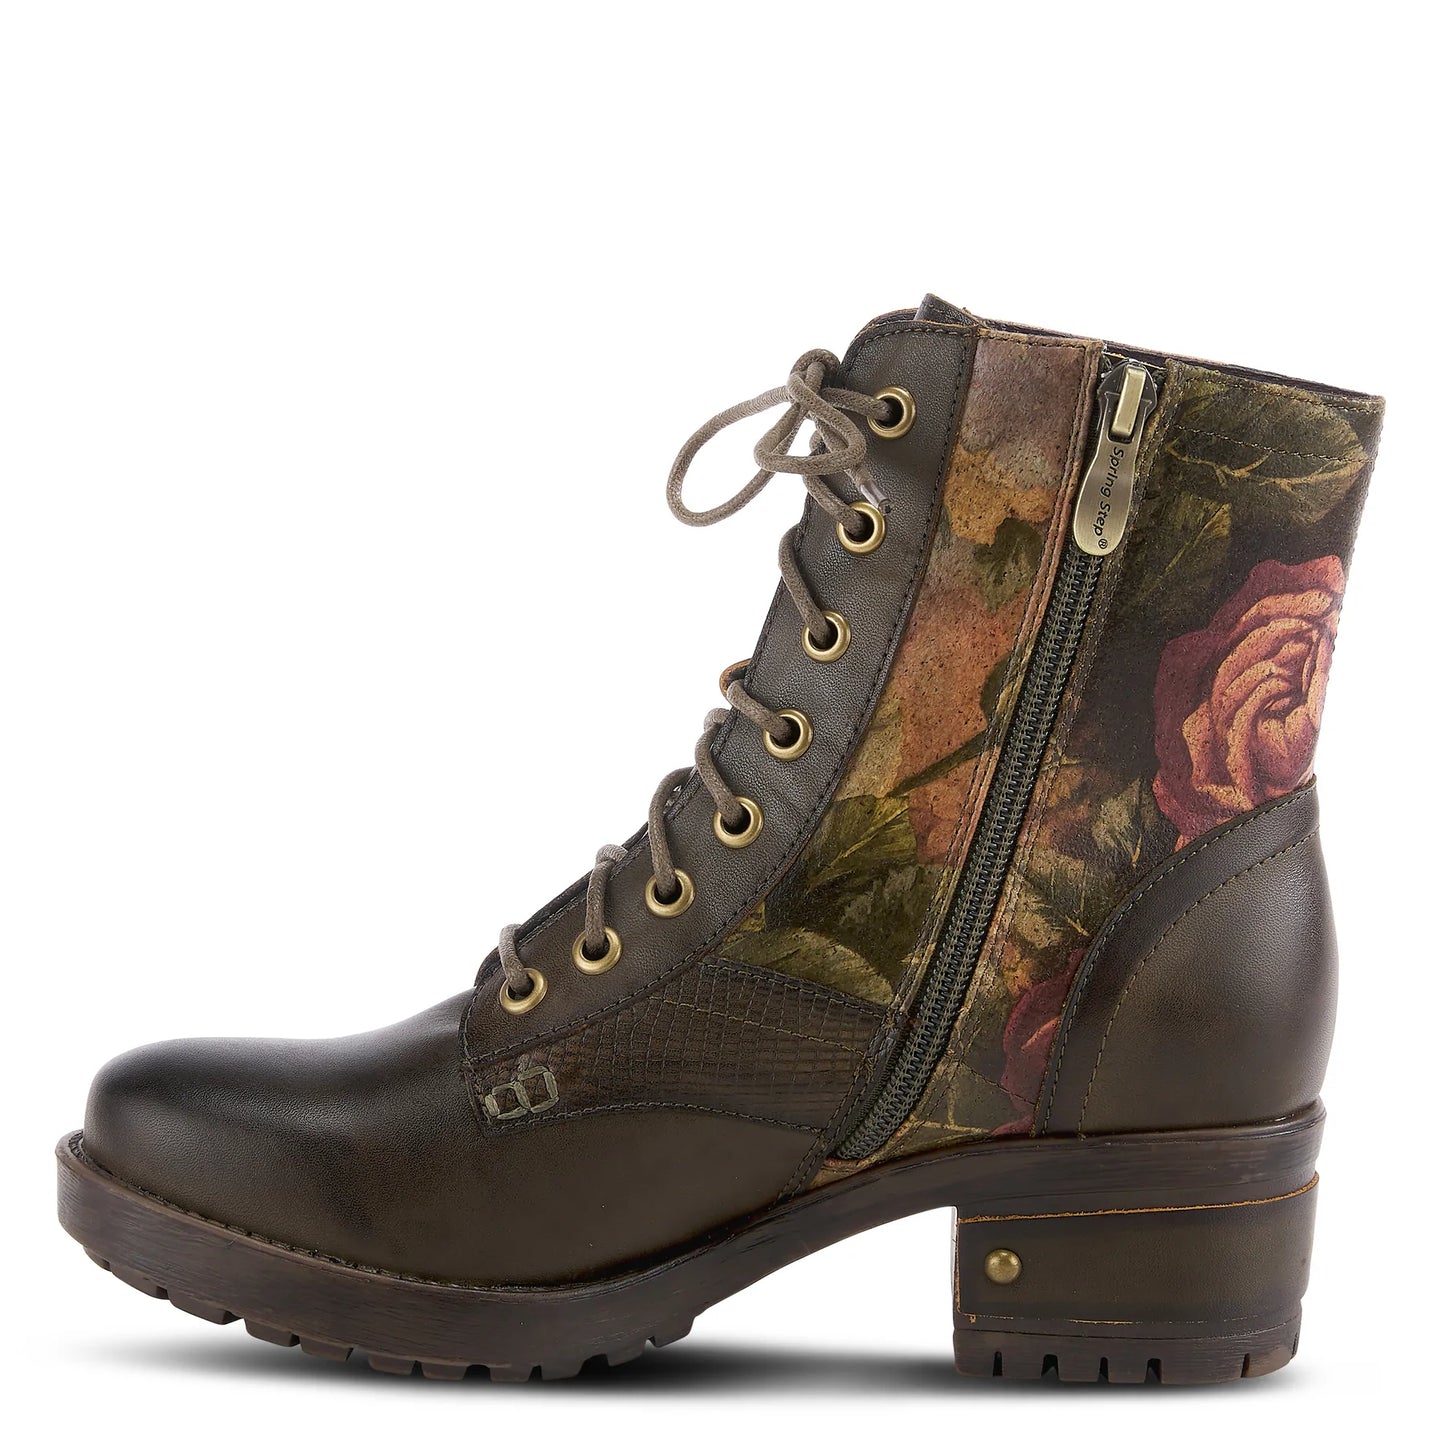 Spring Step Women's L'Artiste Marty Boot - Olive Green